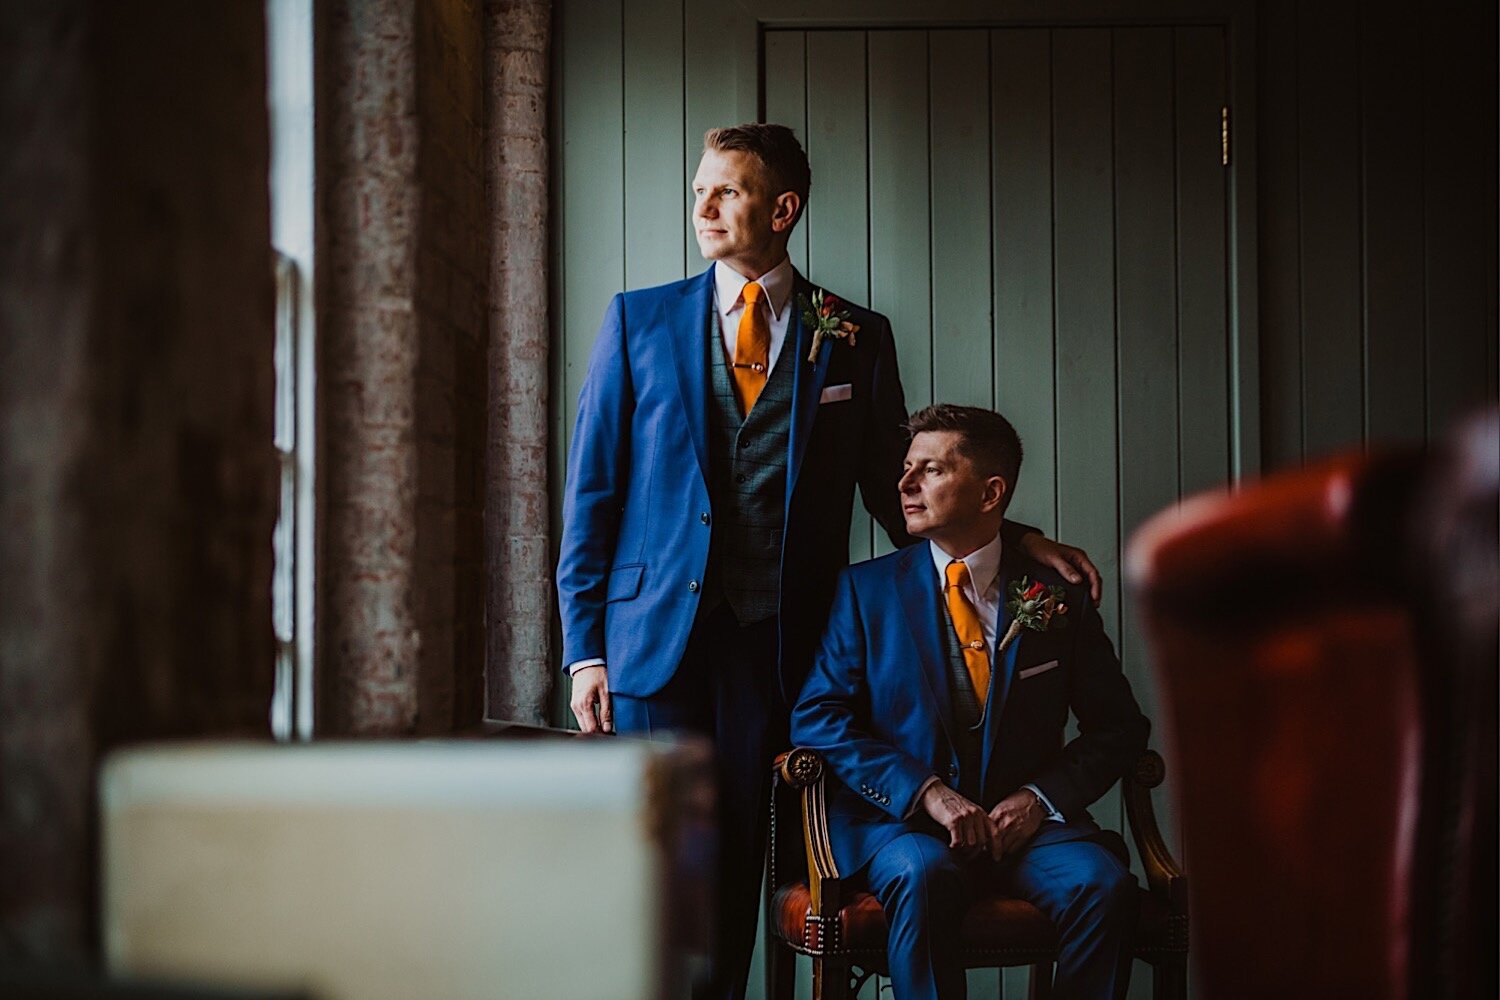 68_TWS-210_photographer_wedding_industrial_venue_gay_grooms_photography_chic_westmill_derby.jpg